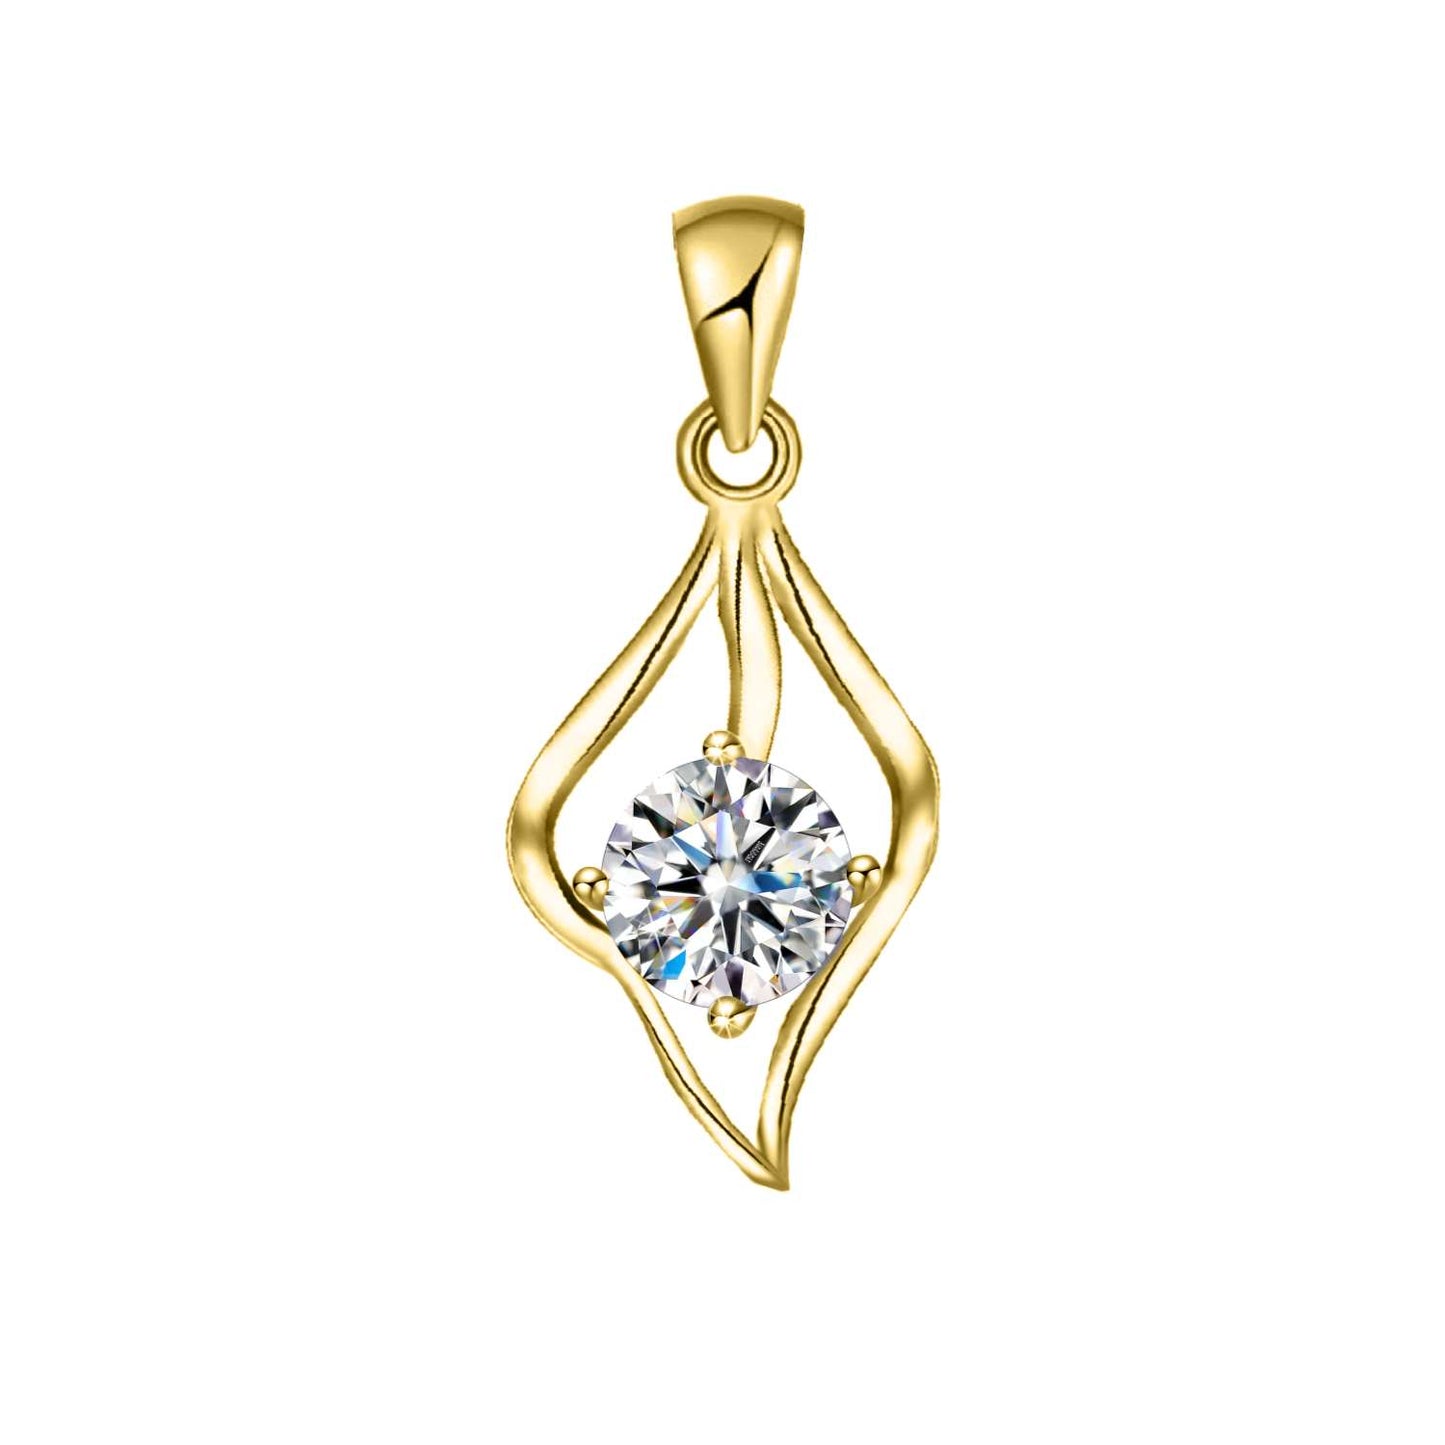 Dew Drop Solitaire Pendant in 92.5 Sterling Silver - 18k Gold Finish